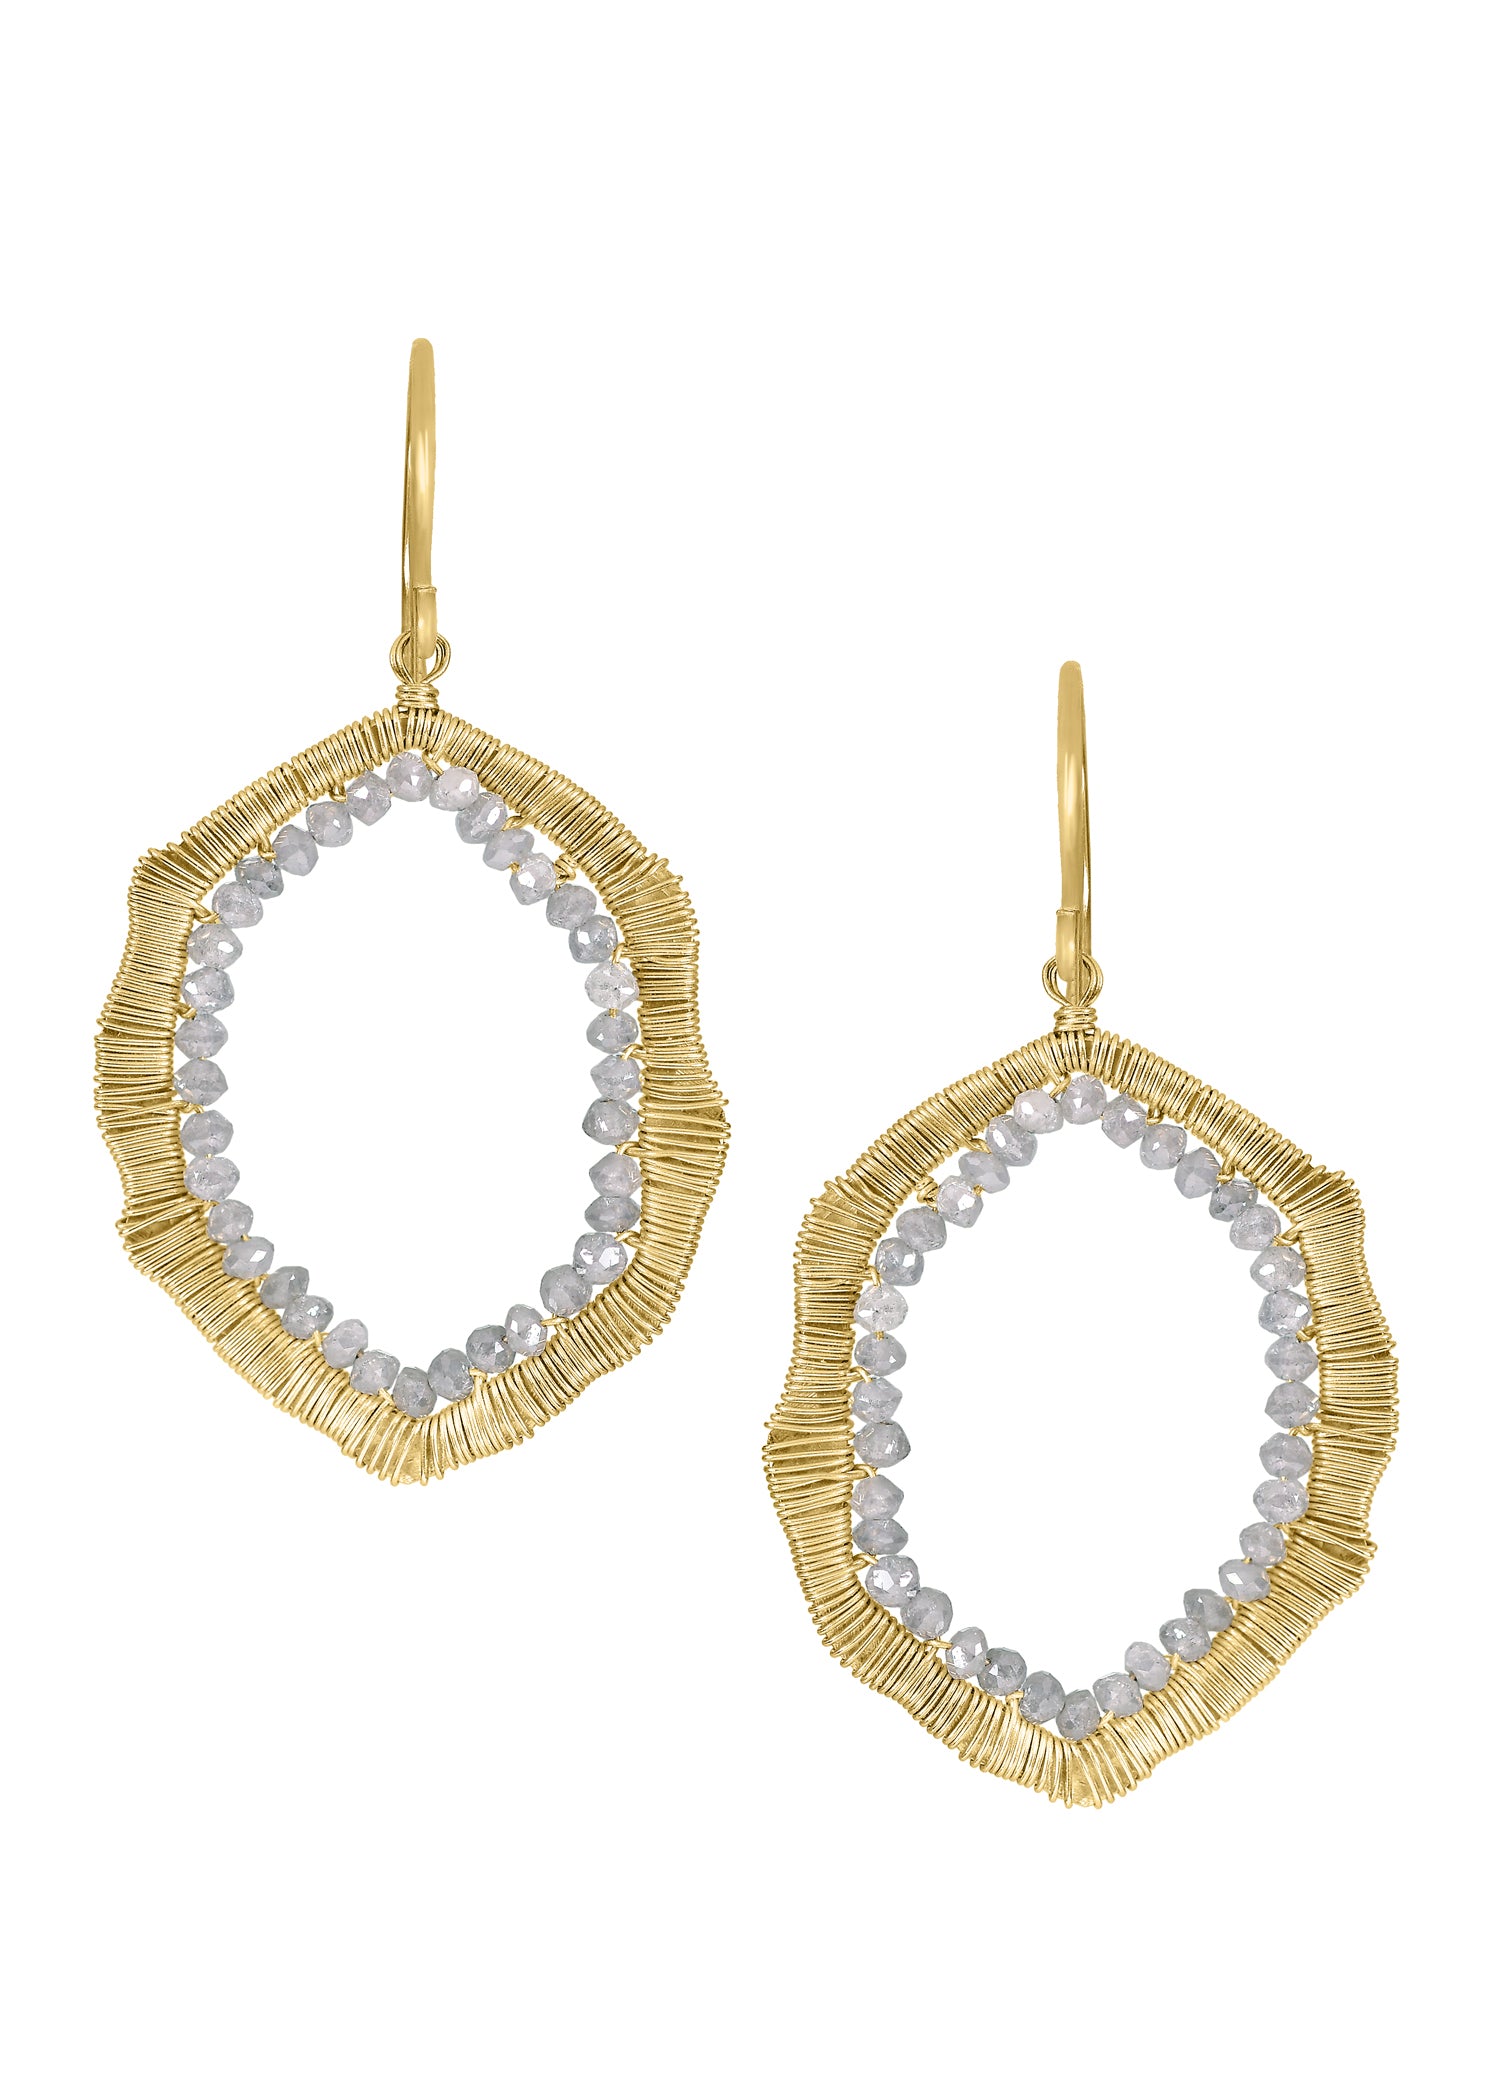 Gray diamonds 14k gold Earrings measure 1-7/8" in length (including the ear wires) and 1" in width at the widest point Handmade in our Los Angeles studio